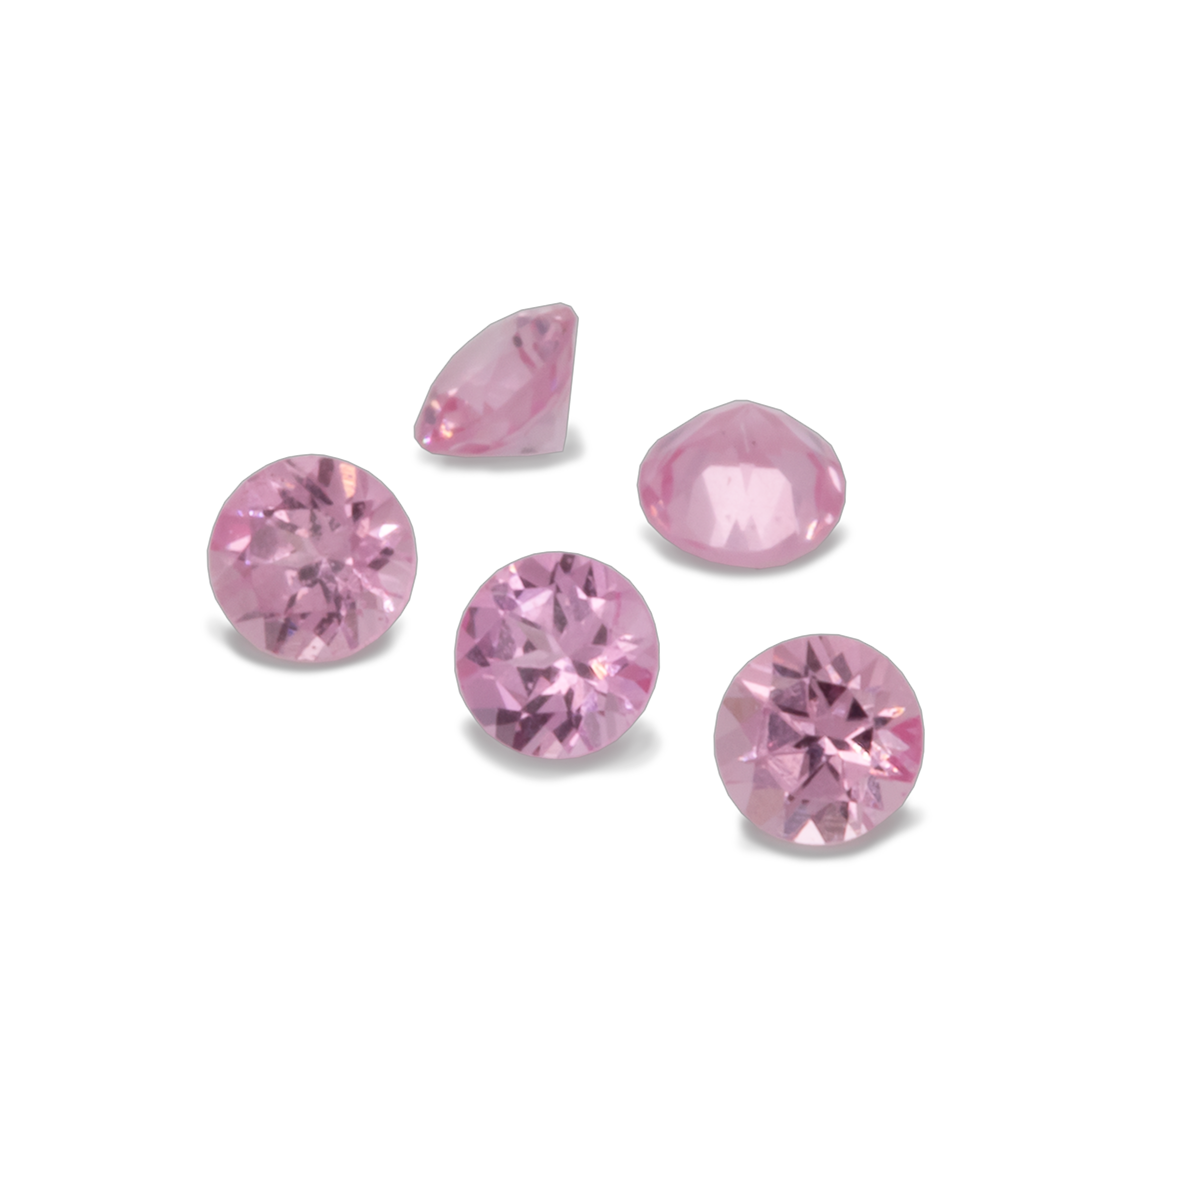 Spinel - pink, round, 1.6x1.6 mm, approx. 0.01 cts, No. SP81001